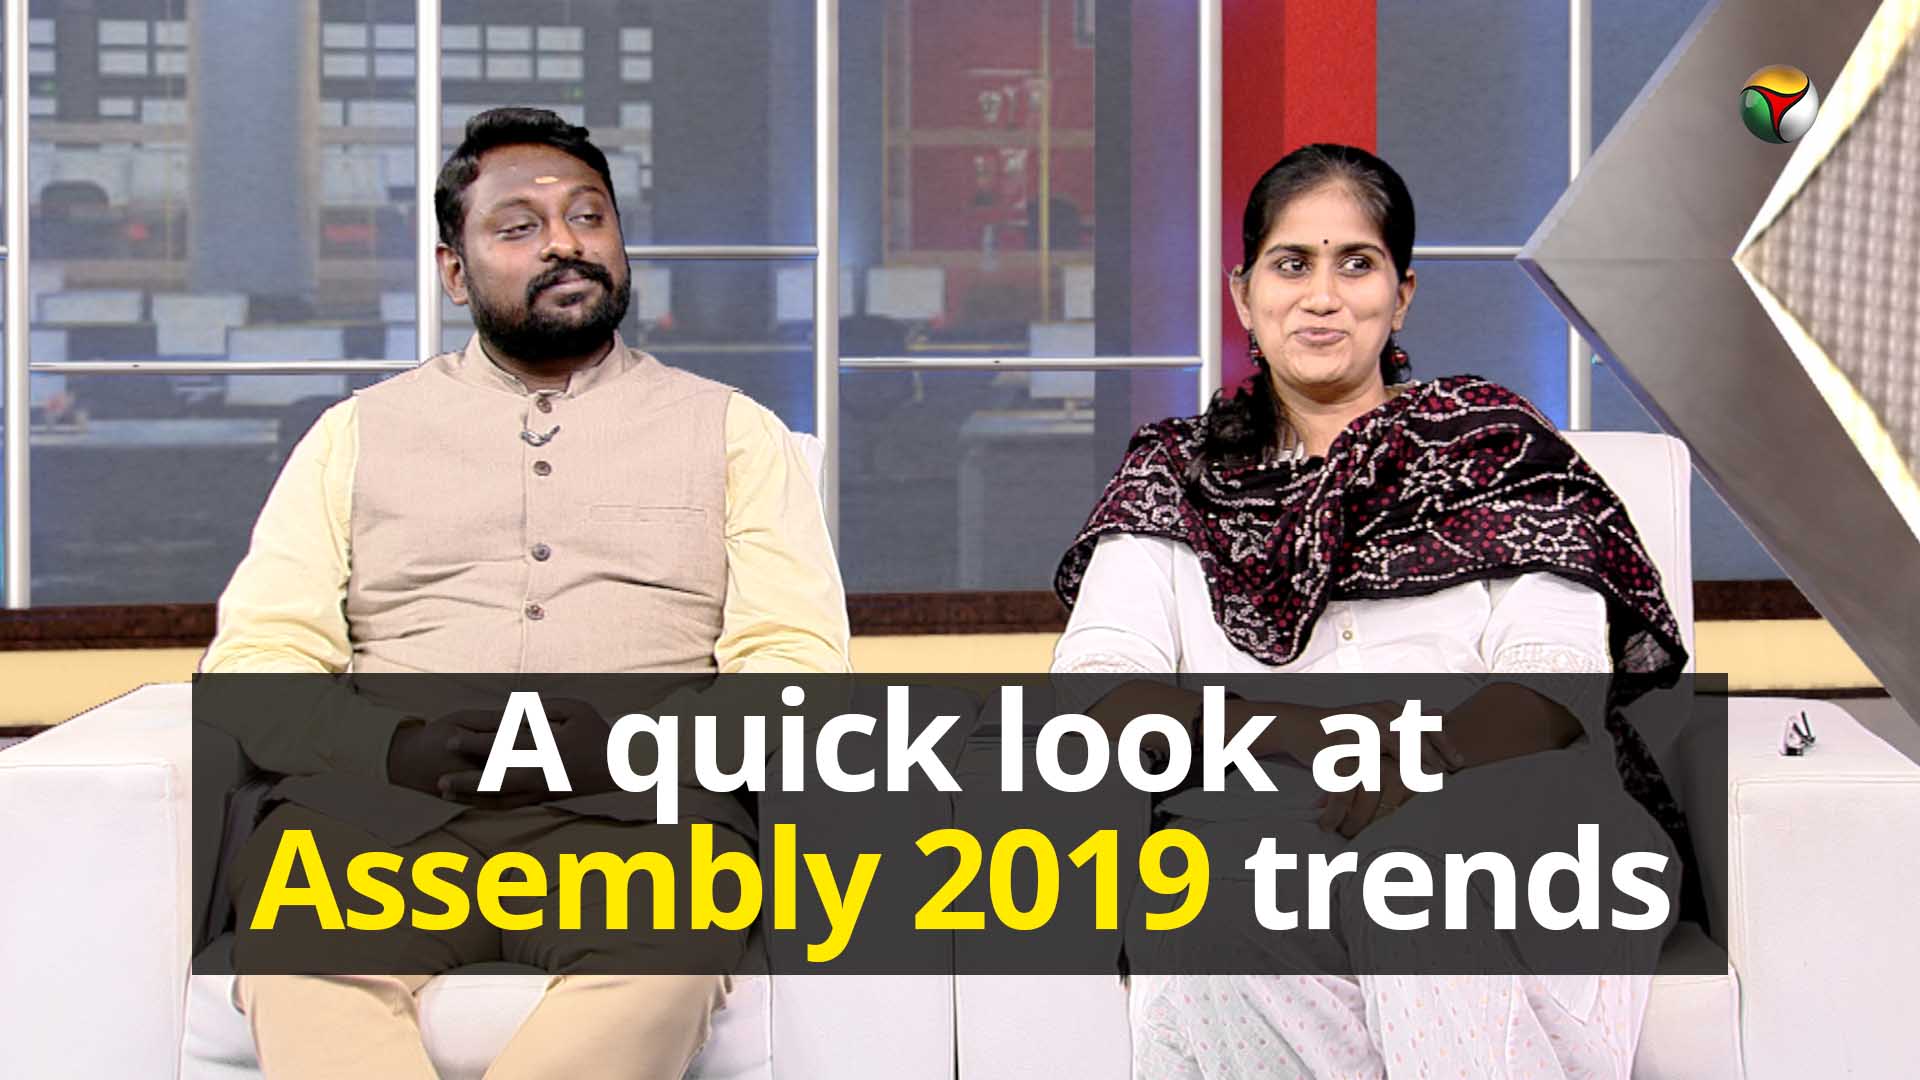 A quick look at Assembly 2019 trends